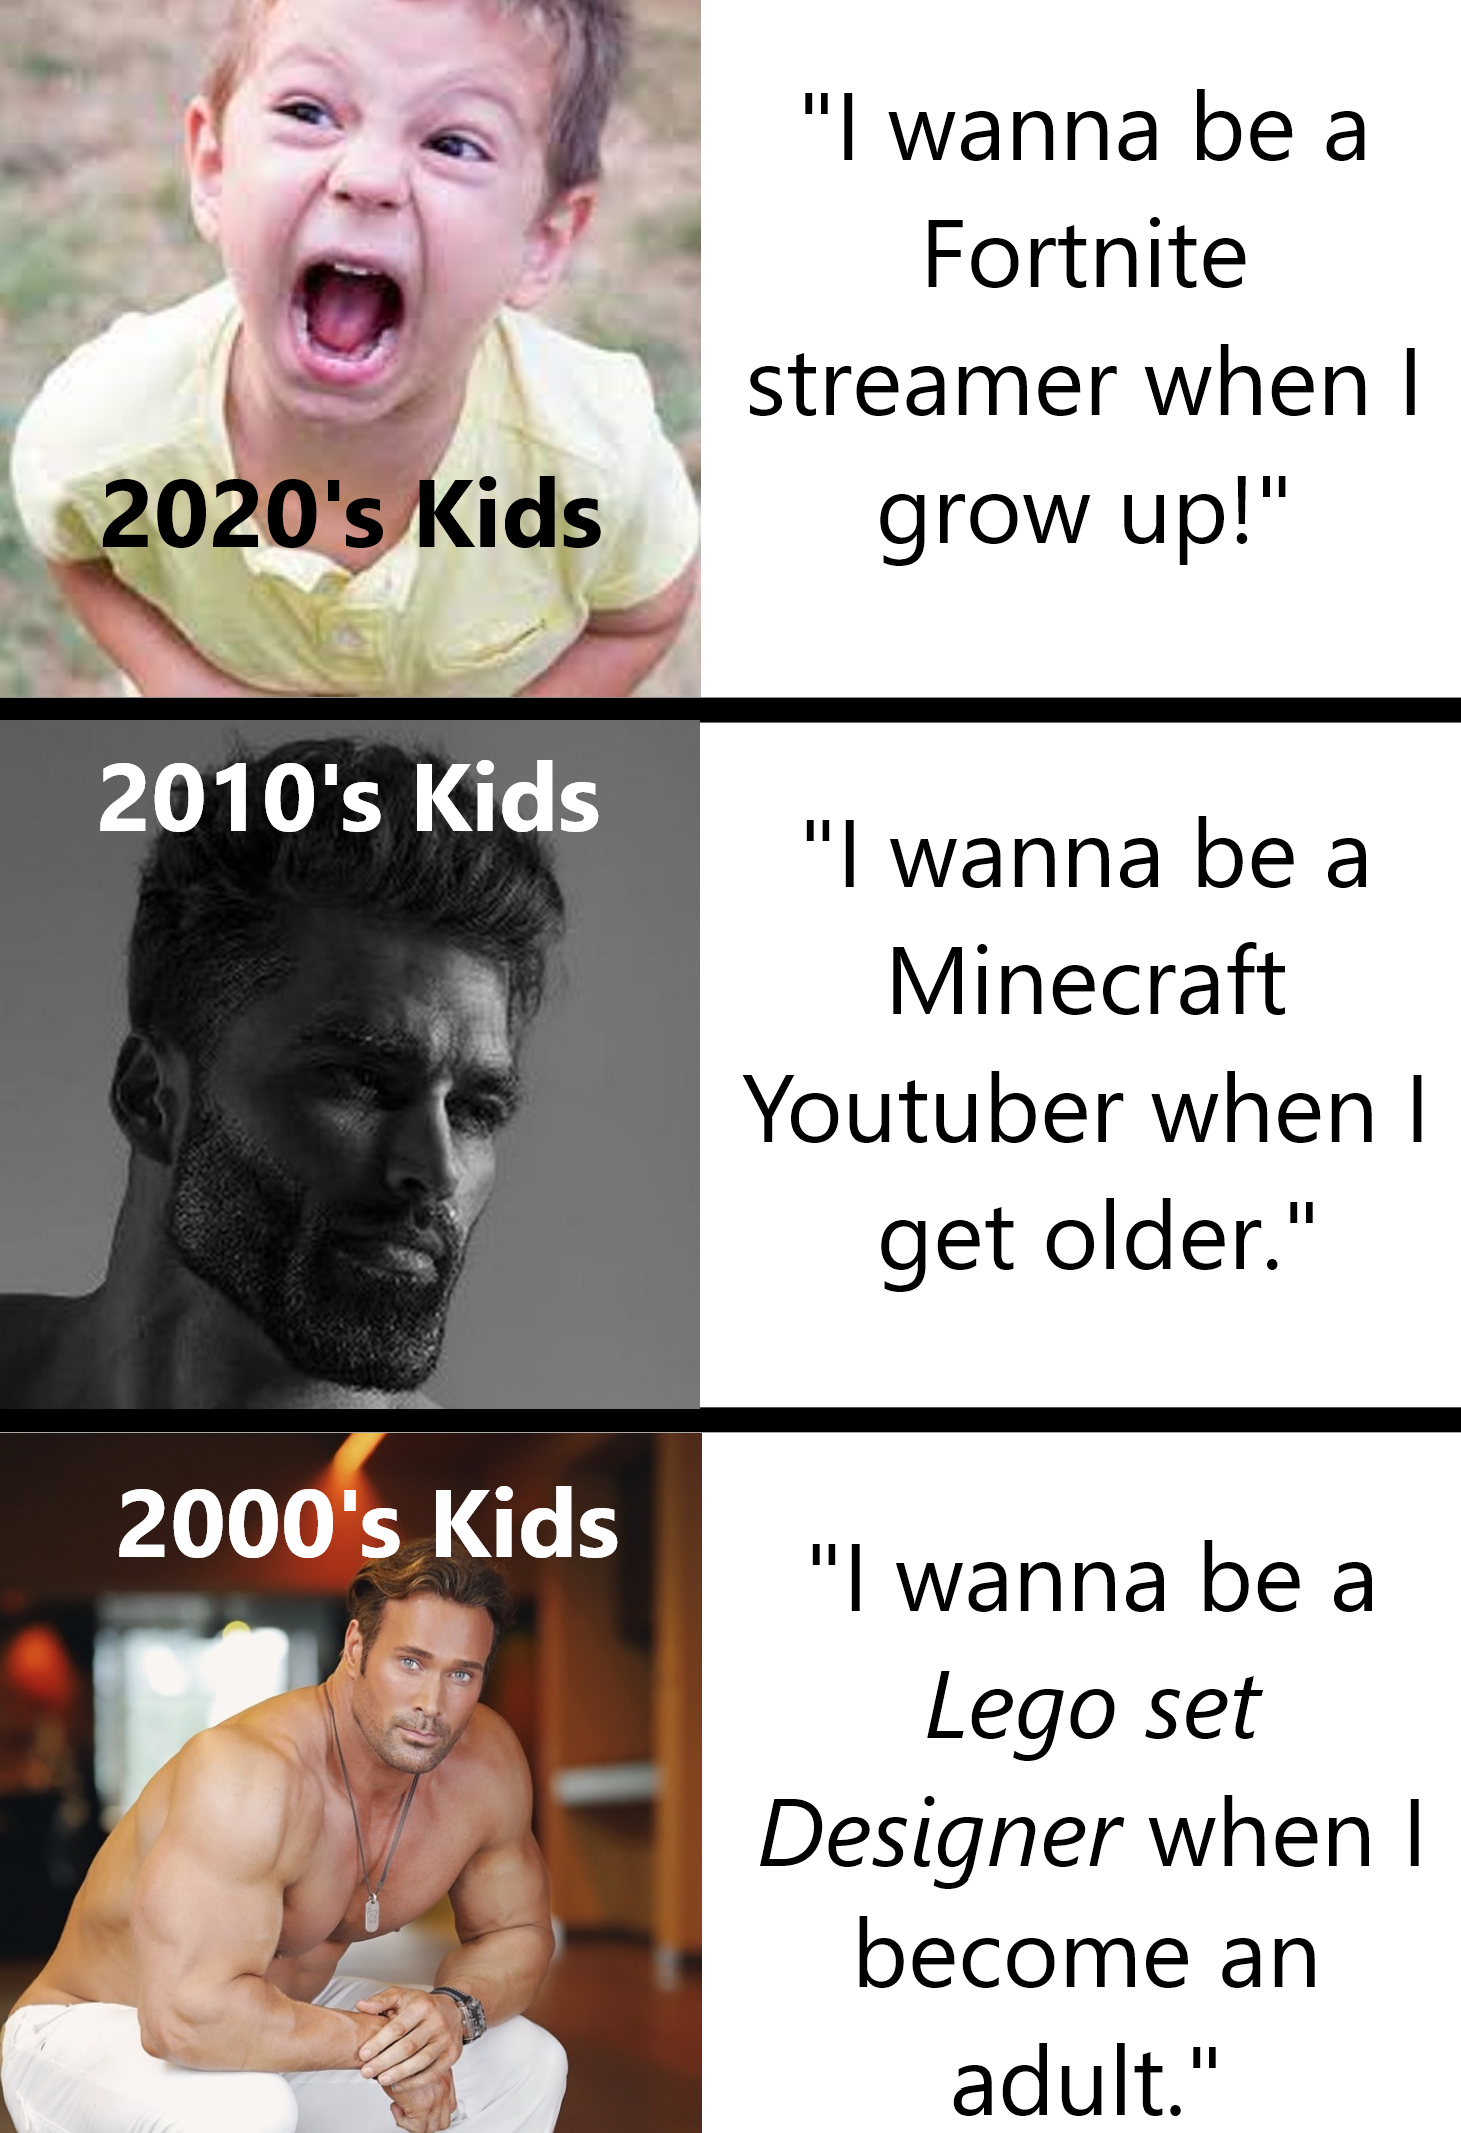 gaming memes - memes - 2020's Kids 2010's Kids 2000's Kids "I wanna be a Fortnite streamer when I grow up!" "I wanna be a Minecraft Youtuber when I get older." "I wanna be a Lego set Designer when I become an adult."